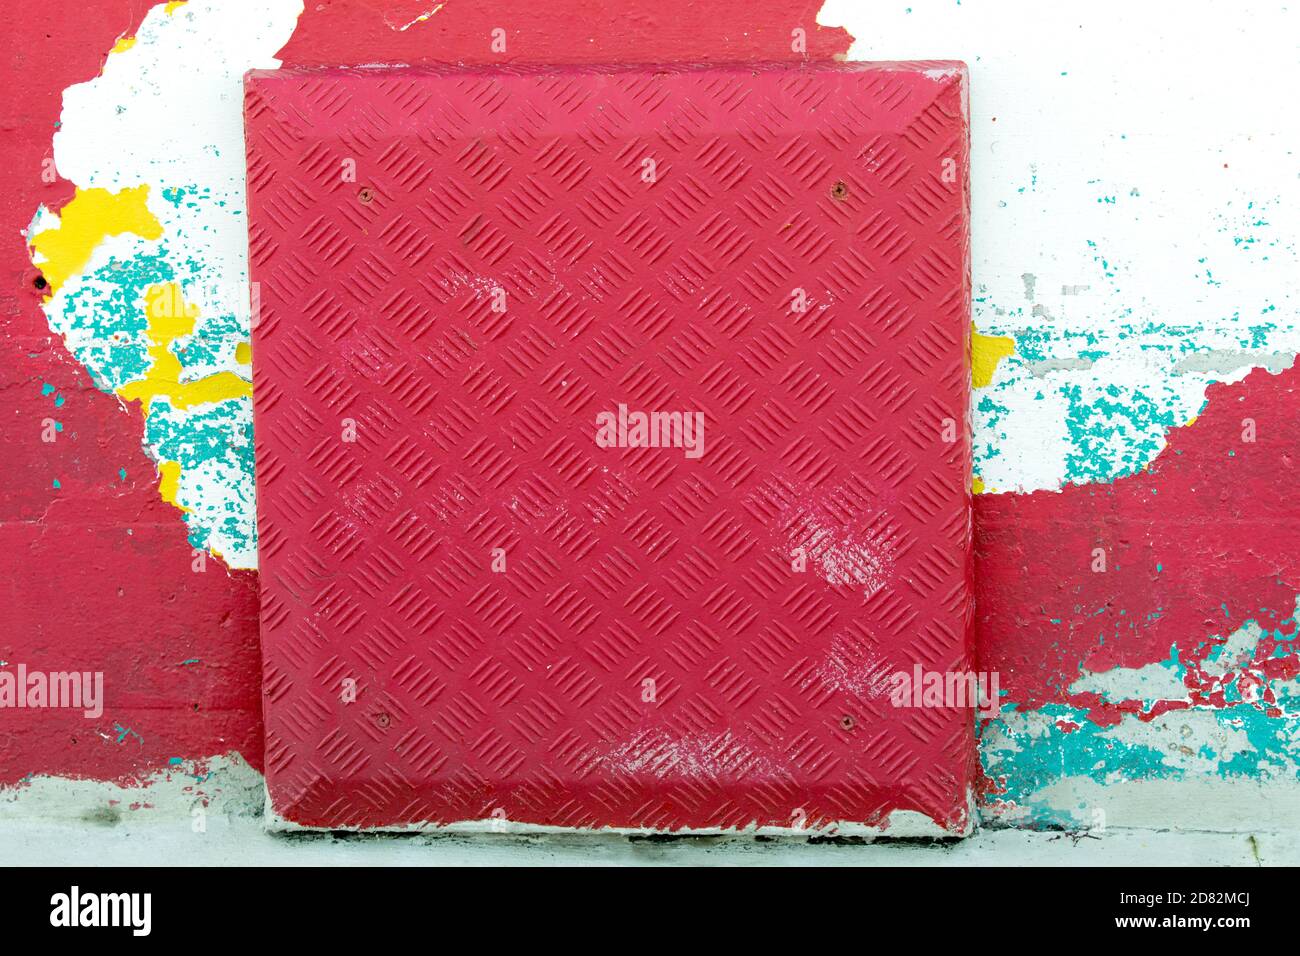 Flakey painted wall and metallic plate Stock Photo